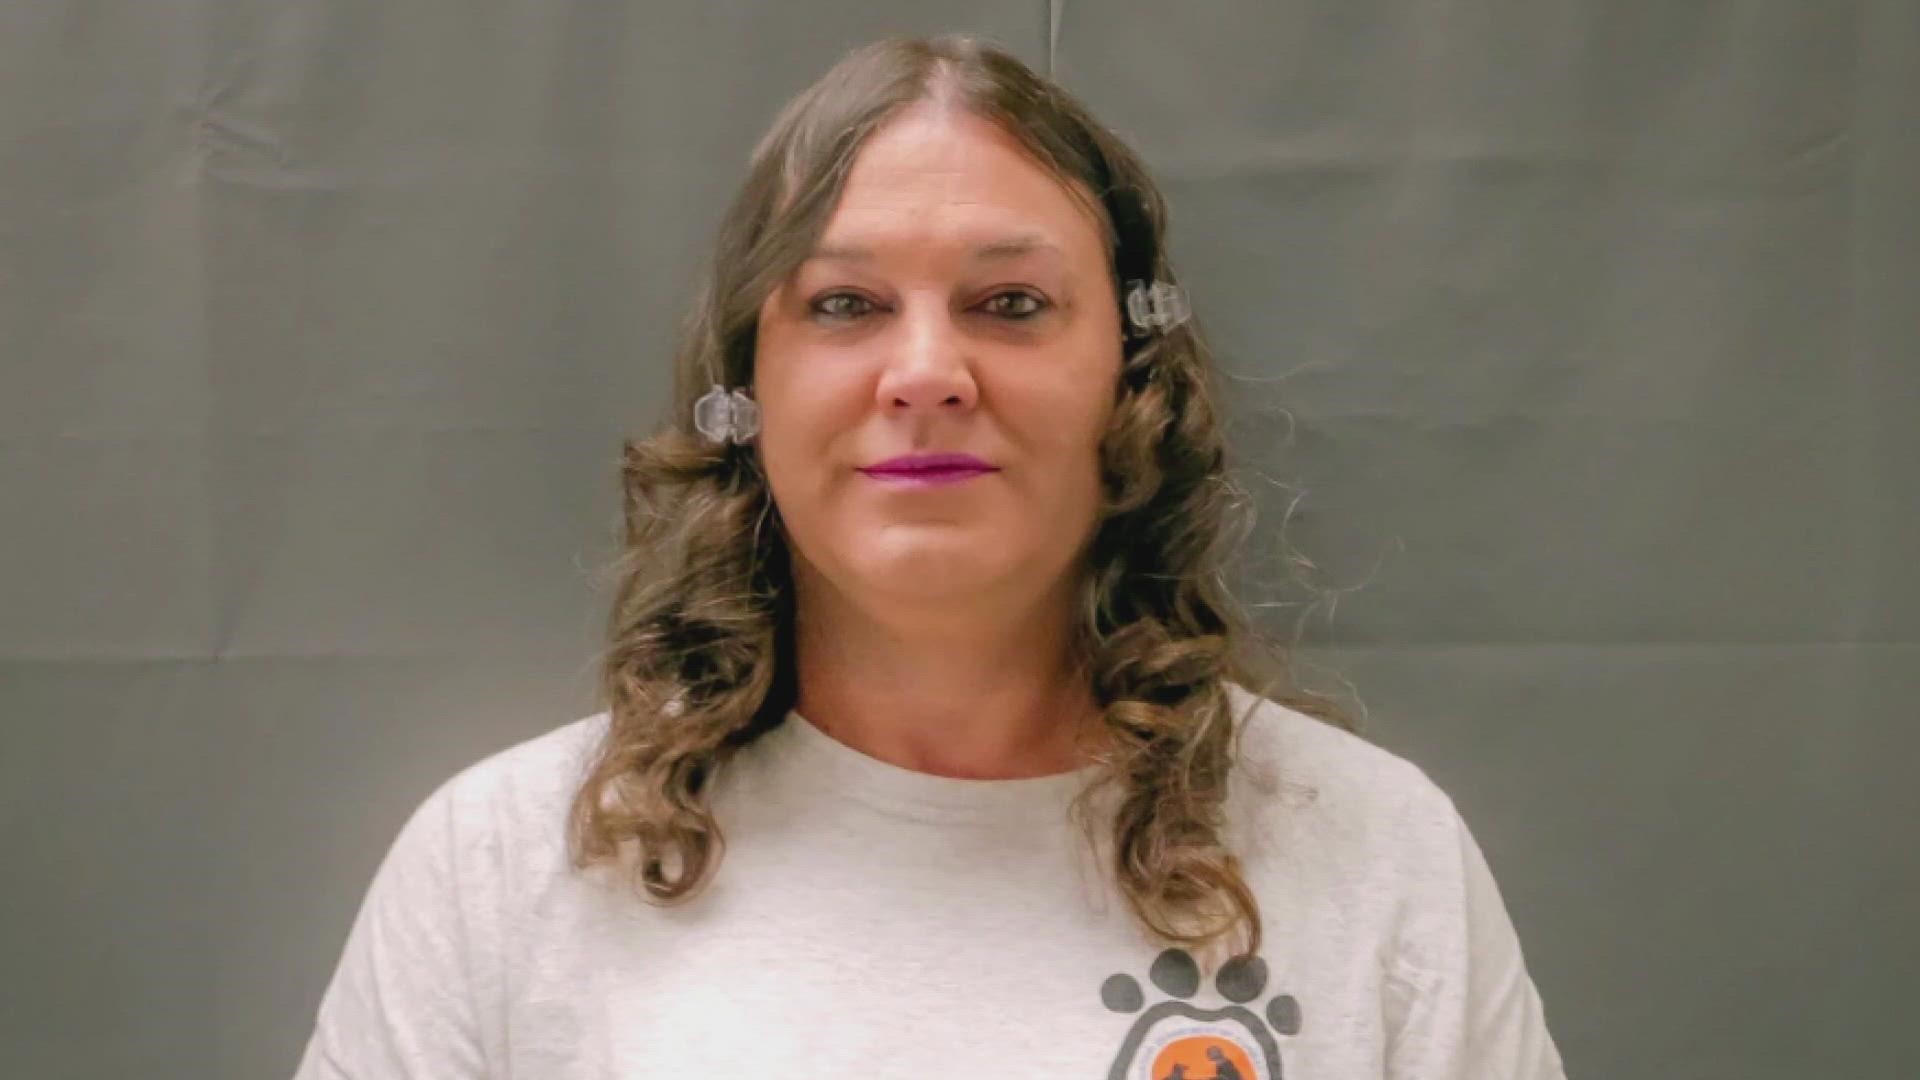 Missouri is set to execute an openly transgender death row inmate for the first time. On Jan. 2, 2023, Amber McLaughlin is scheduled to die by lethal injection.